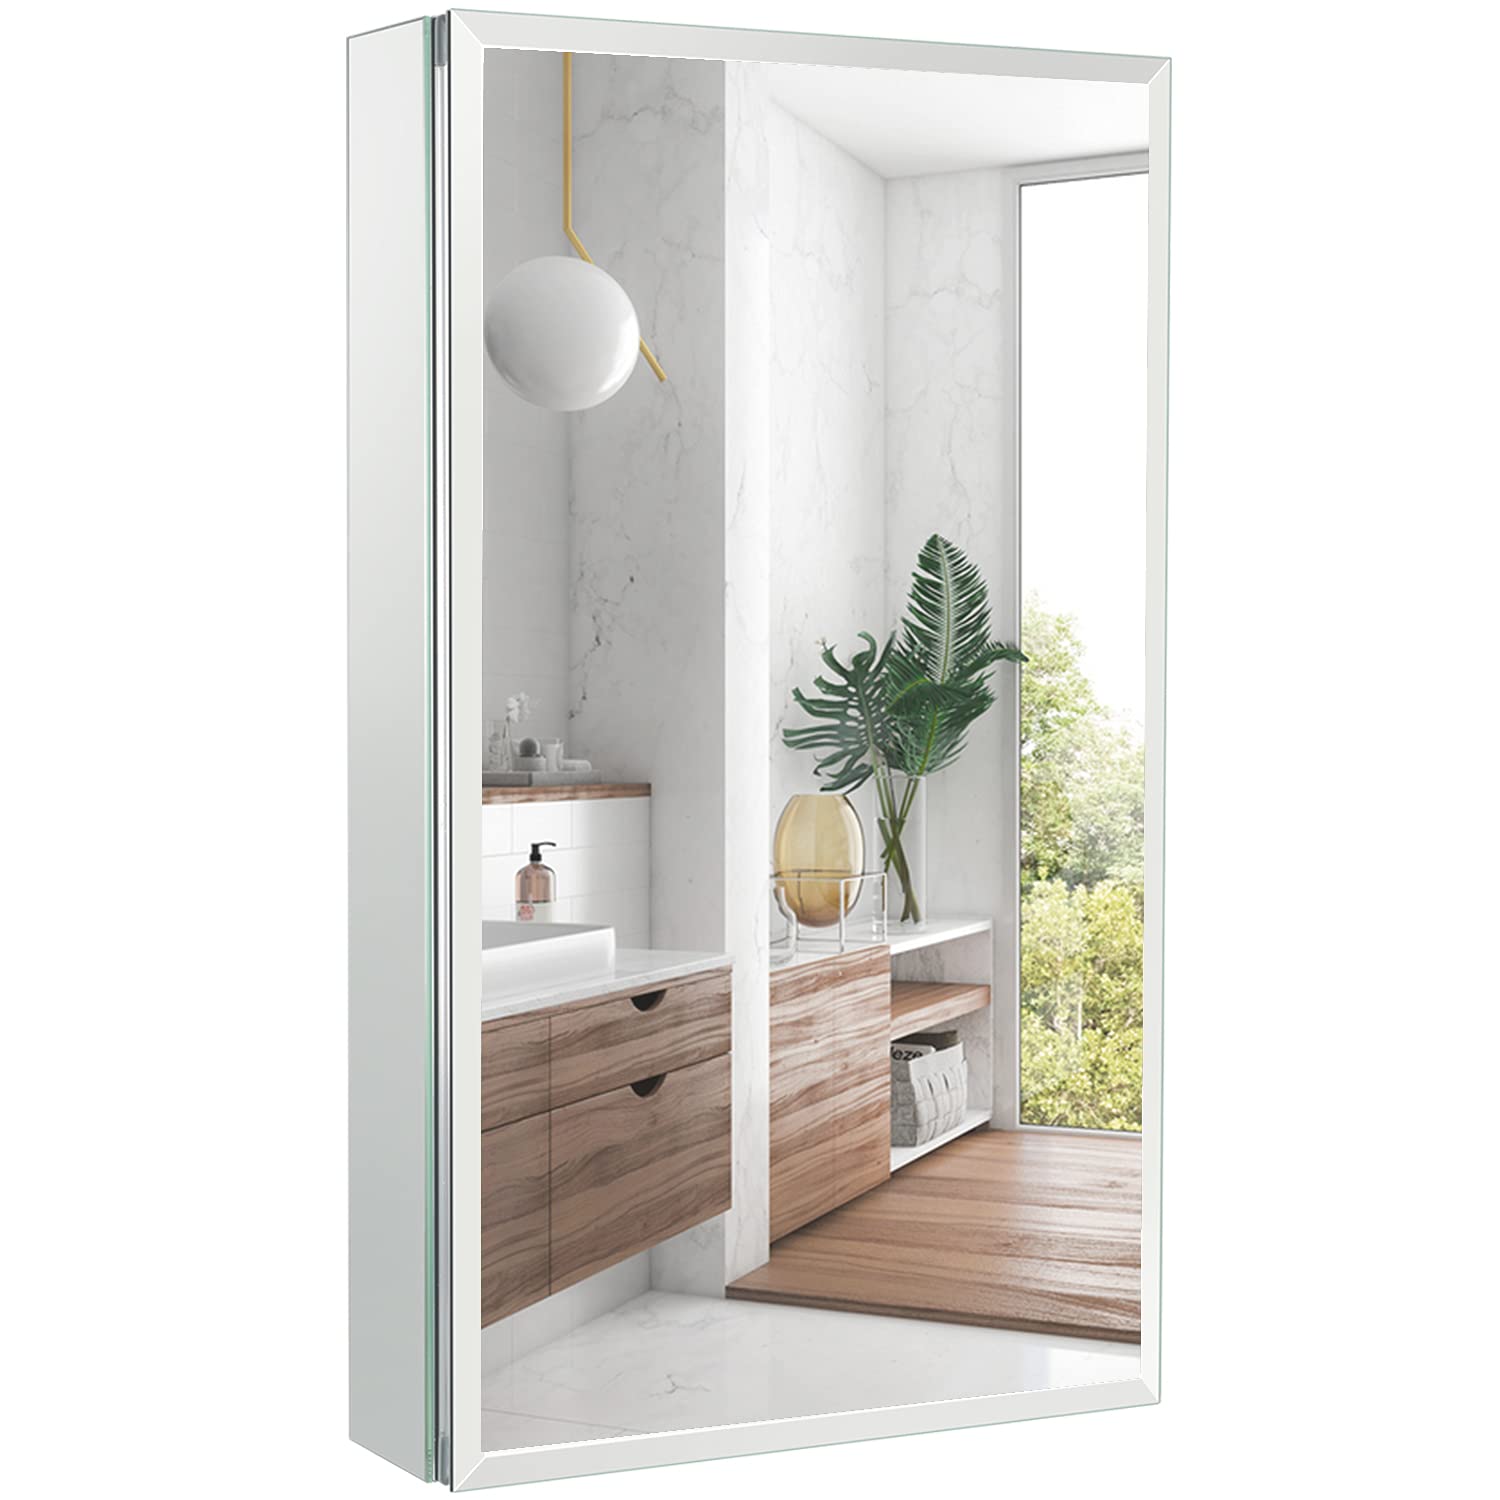 MOVO Medicine Cabinet with Mirror,15 Inch X 26 Inch Aluminum Bathroom Mirror Cabinet with Single Door,Adjustable Glass Shelves,Recess or Surface Mo...